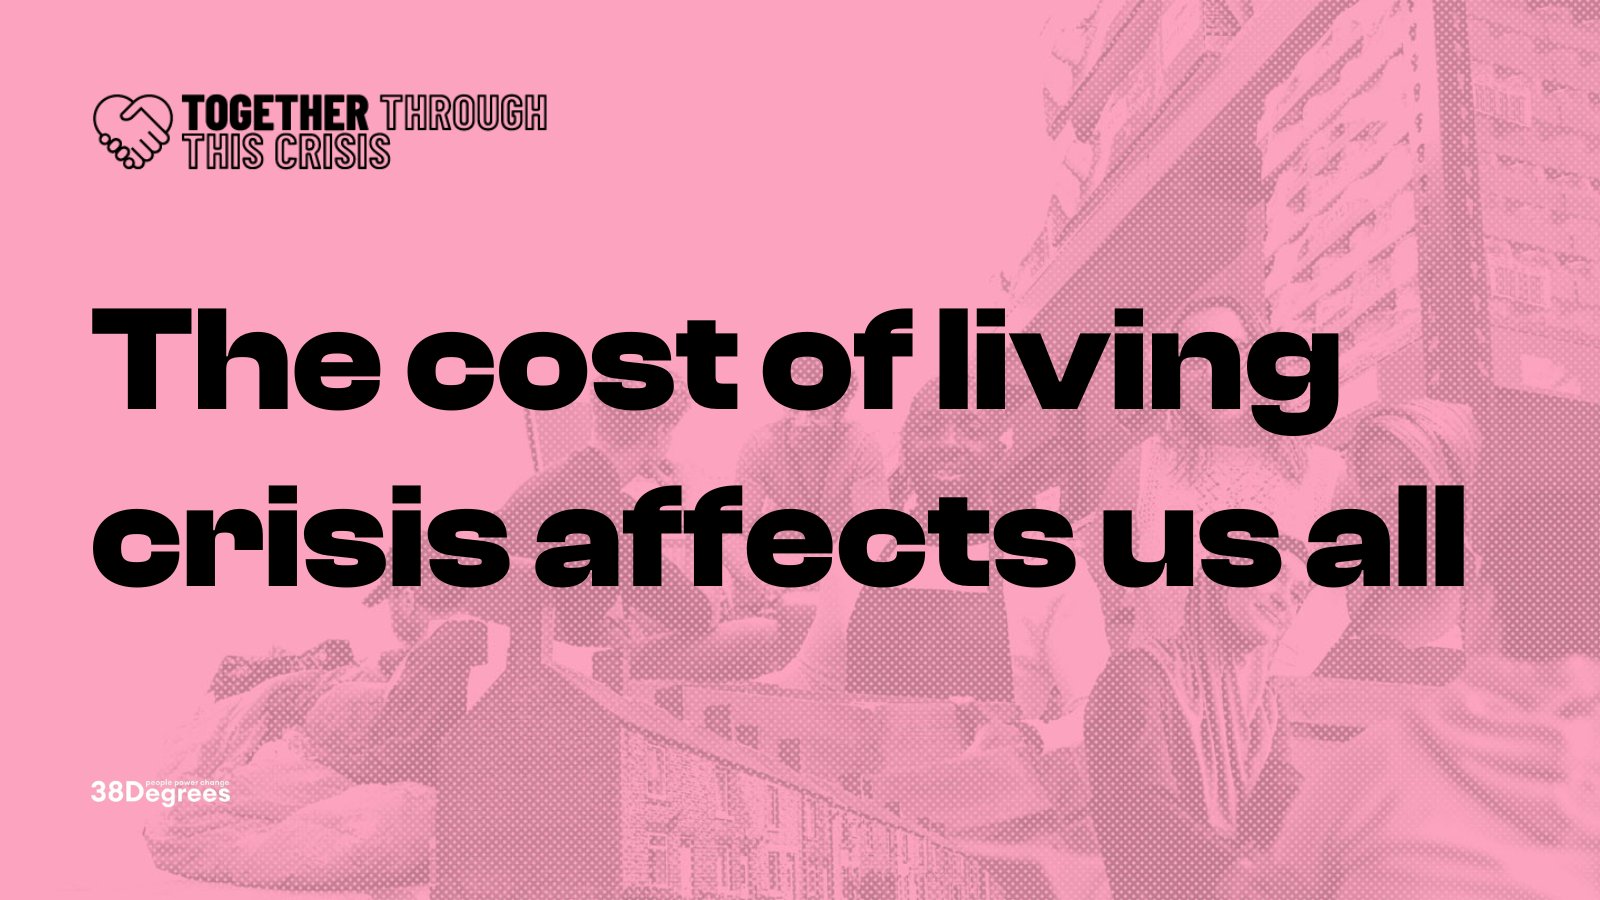 The cost of living crisis affects us all